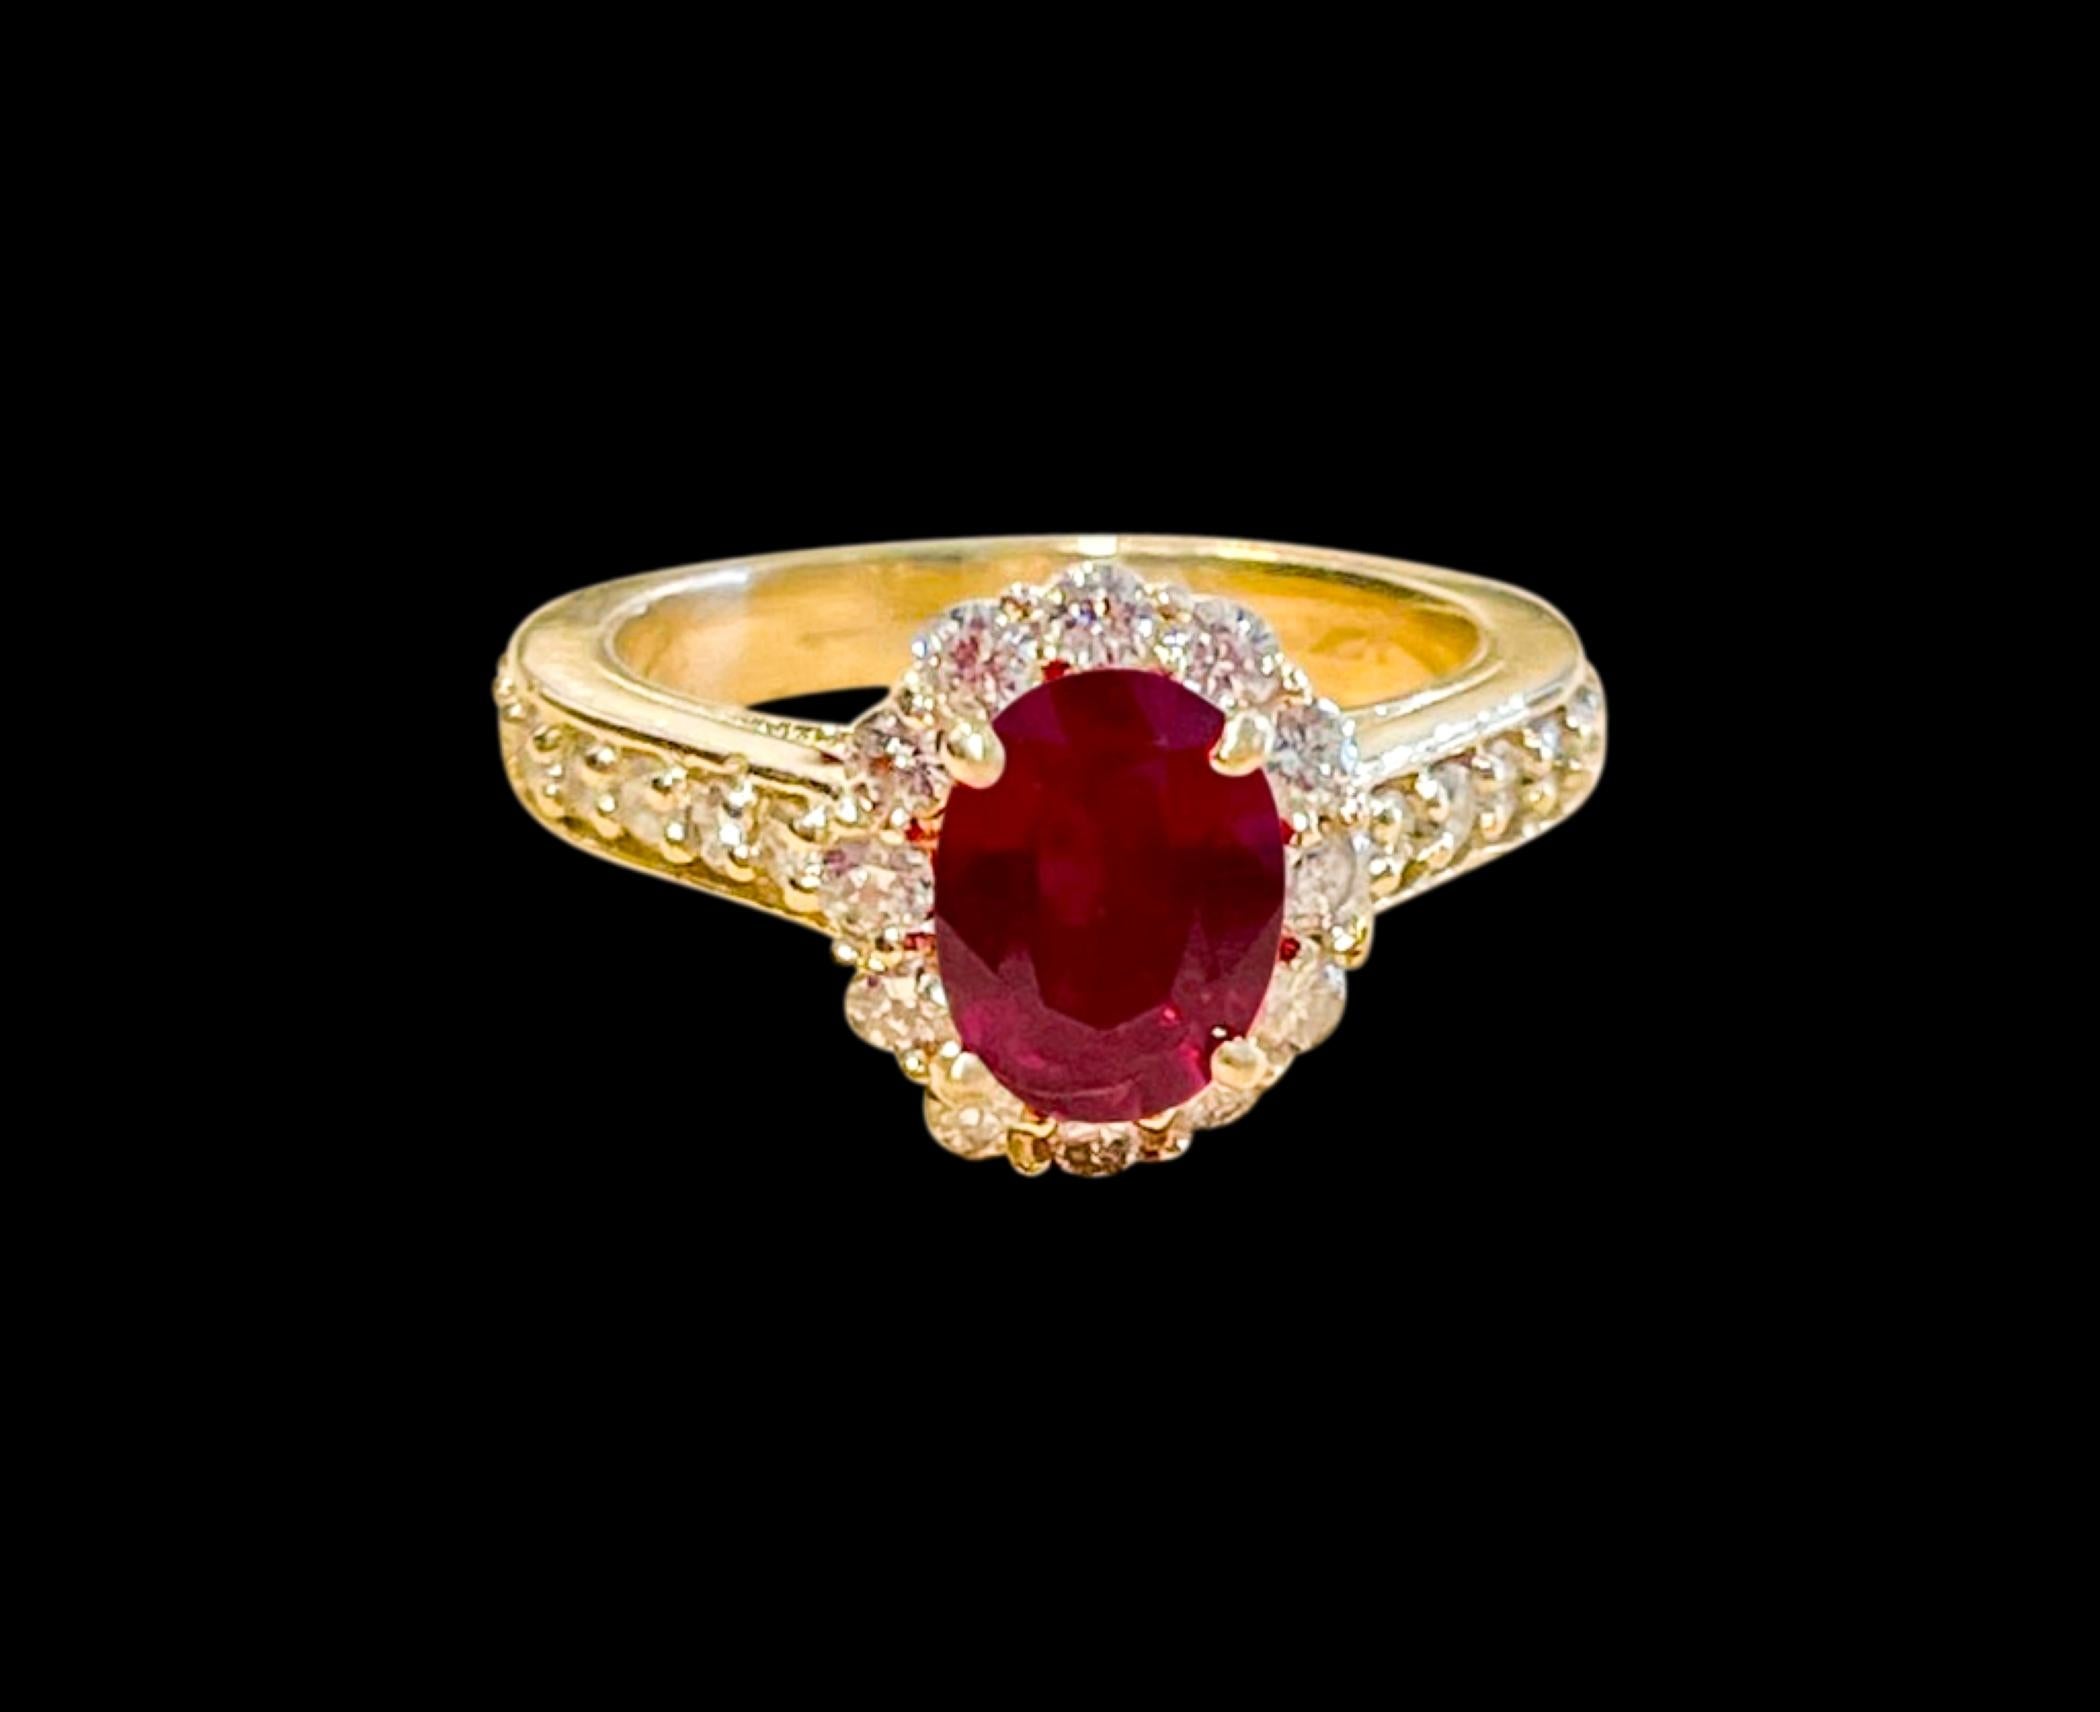 6X8 Oval Cut   Approximately 1.5  Carat Treated Ruby  14  Karat Yellow Gold Ring Size 6.0
Diamond Brilliant cut approximately 1.20 ct , Very Nice quality of diamonds. Diamonds all around the stone and on the band too
Its a treated ruby prong set
14